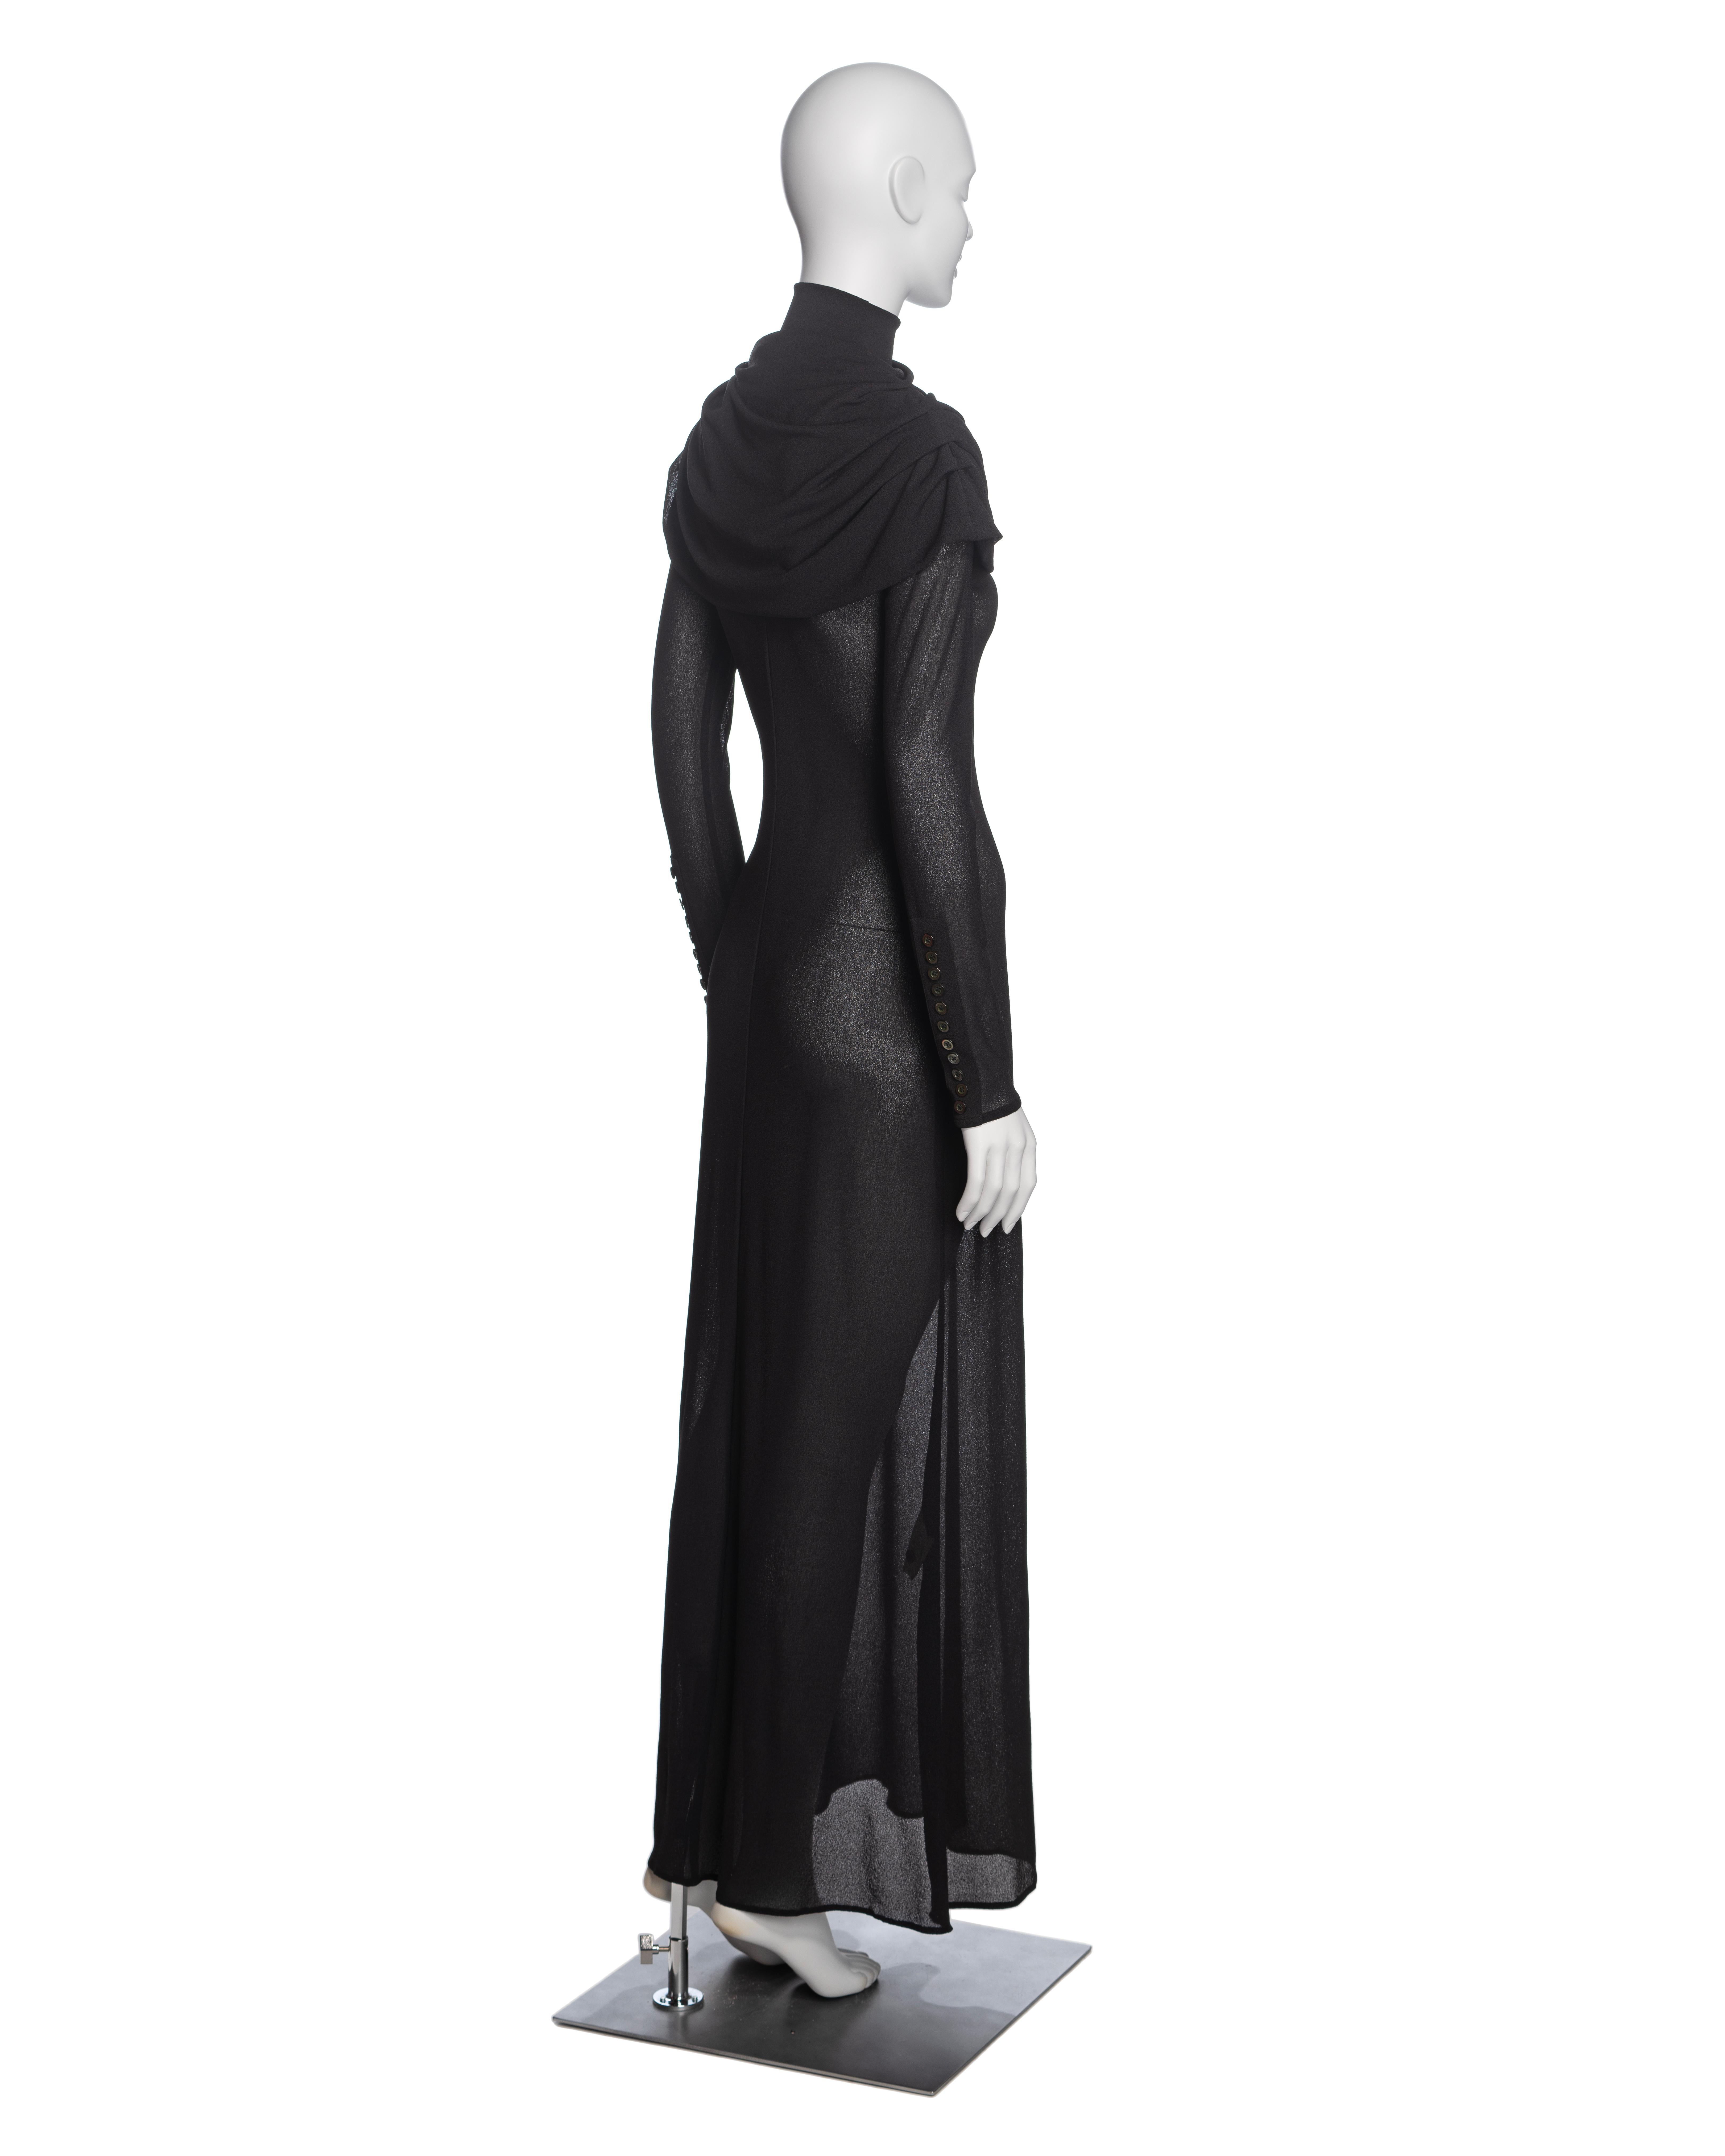 Alexander McQueen Black Mock Neck Evening Dress with Draped Cowl, 'Joan' FW 1998 For Sale 4